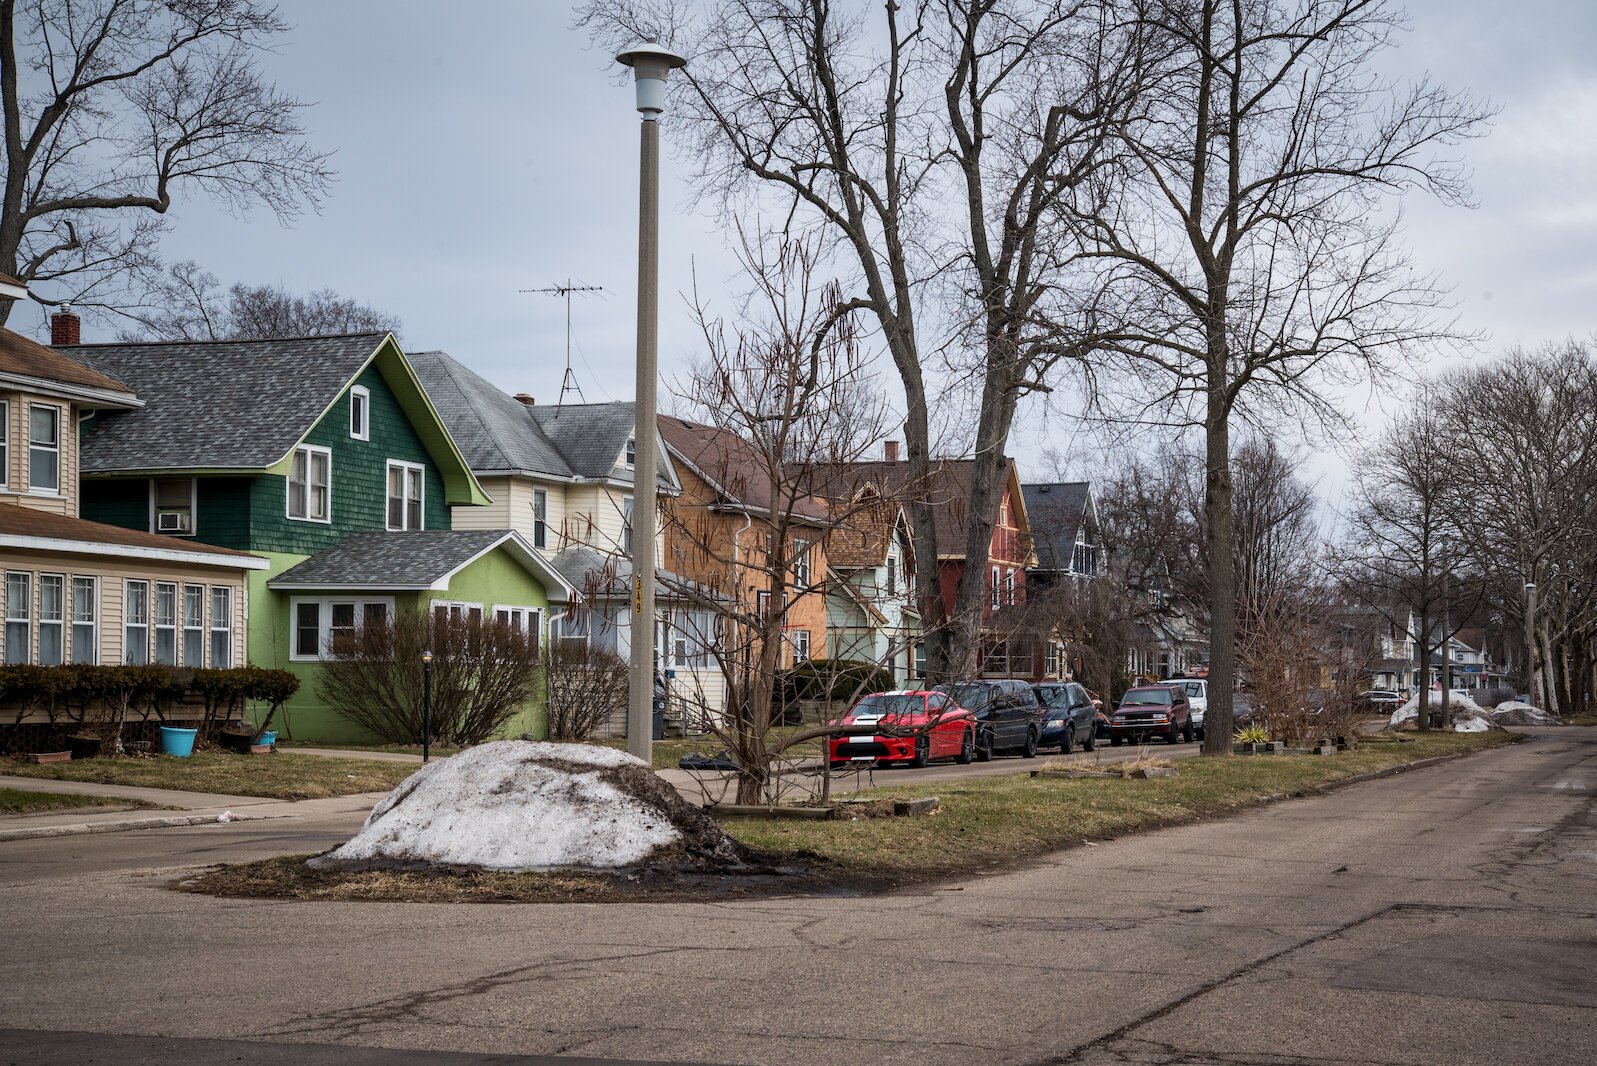 Kalamazoo County needs additional housing units in all types and price points, but there is a greater need for homes that are consistently affordable for those making moderate to low incomes.